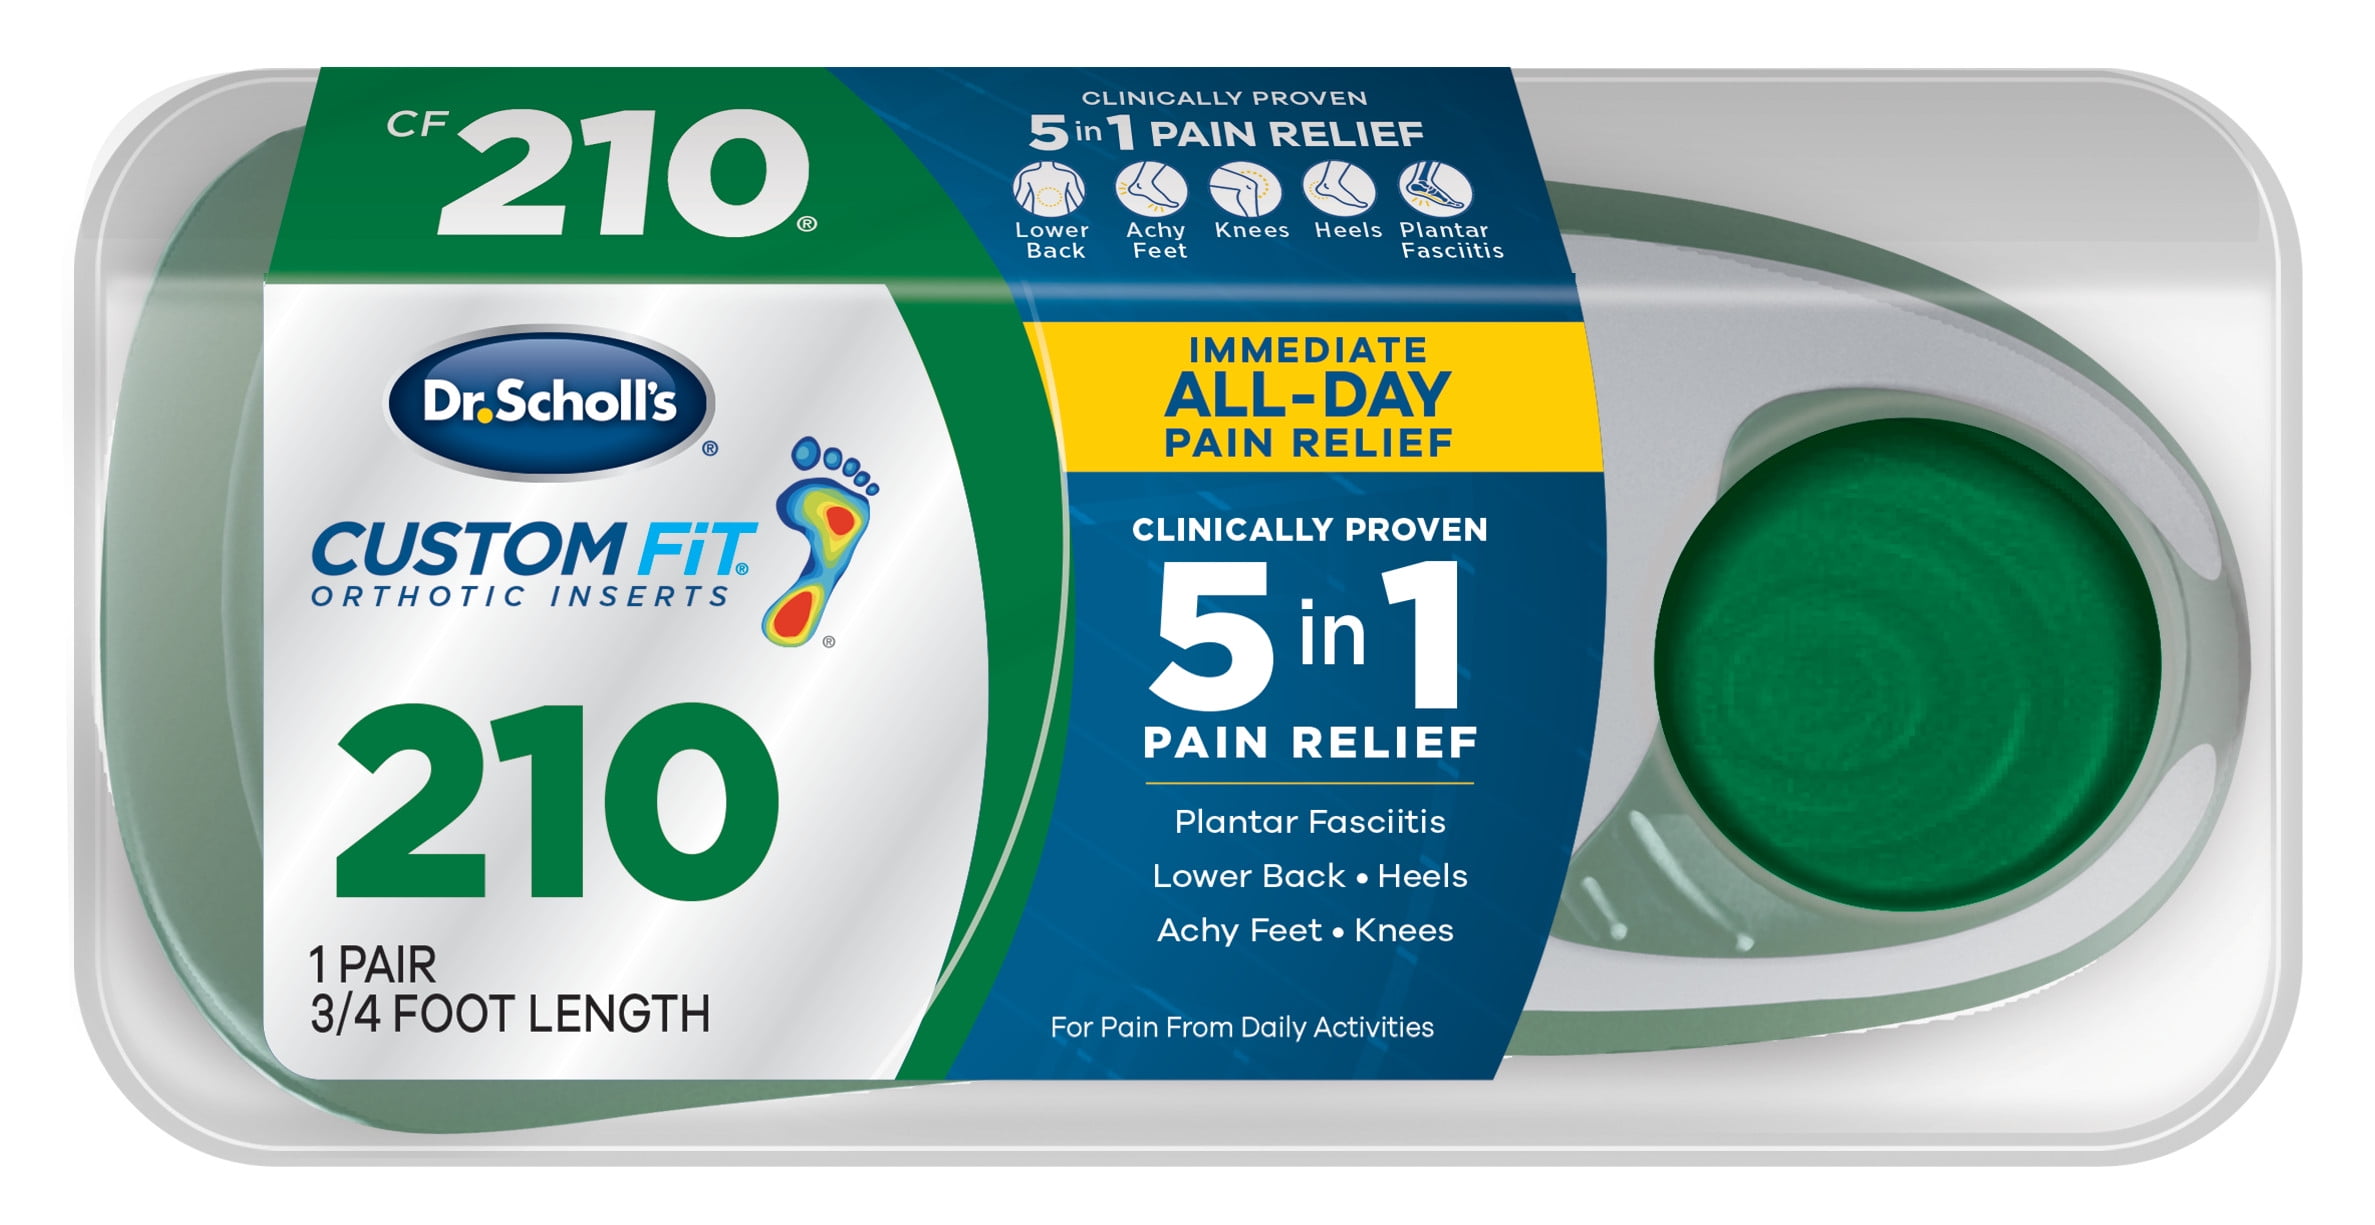 Dr. Scholl's Dr Scholls Custom Fit CF 210 Orthotic Insole Shoe Inserts for Foot Knee and Lower Back Relief 1 Pair